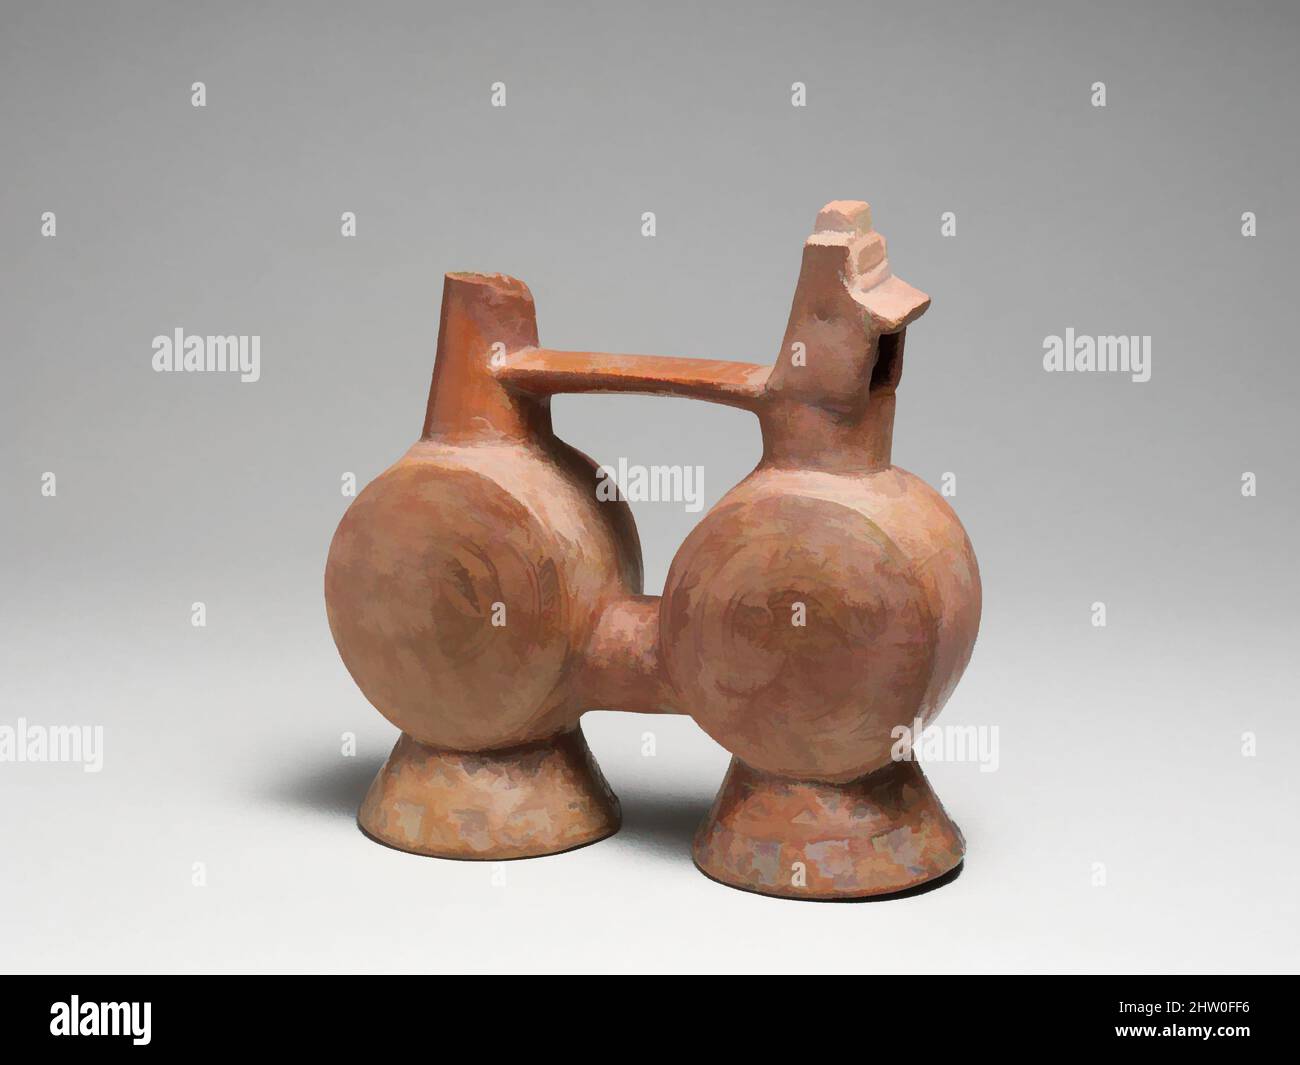 Art inspired by Whistling Jar, Pre-Columbian, 200 B.C.–1000 A.D., North Coast, Peru, Peruvian, Clay, L. 15.7 cm.; H. 16.1 cm.; W. 6.8 cm.; Wt. 391 g., Aerophone-Blow Hole-vessel flute, Classic works modernized by Artotop with a splash of modernity. Shapes, color and value, eye-catching visual impact on art. Emotions through freedom of artworks in a contemporary way. A timeless message pursuing a wildly creative new direction. Artists turning to the digital medium and creating the Artotop NFT Stock Photo